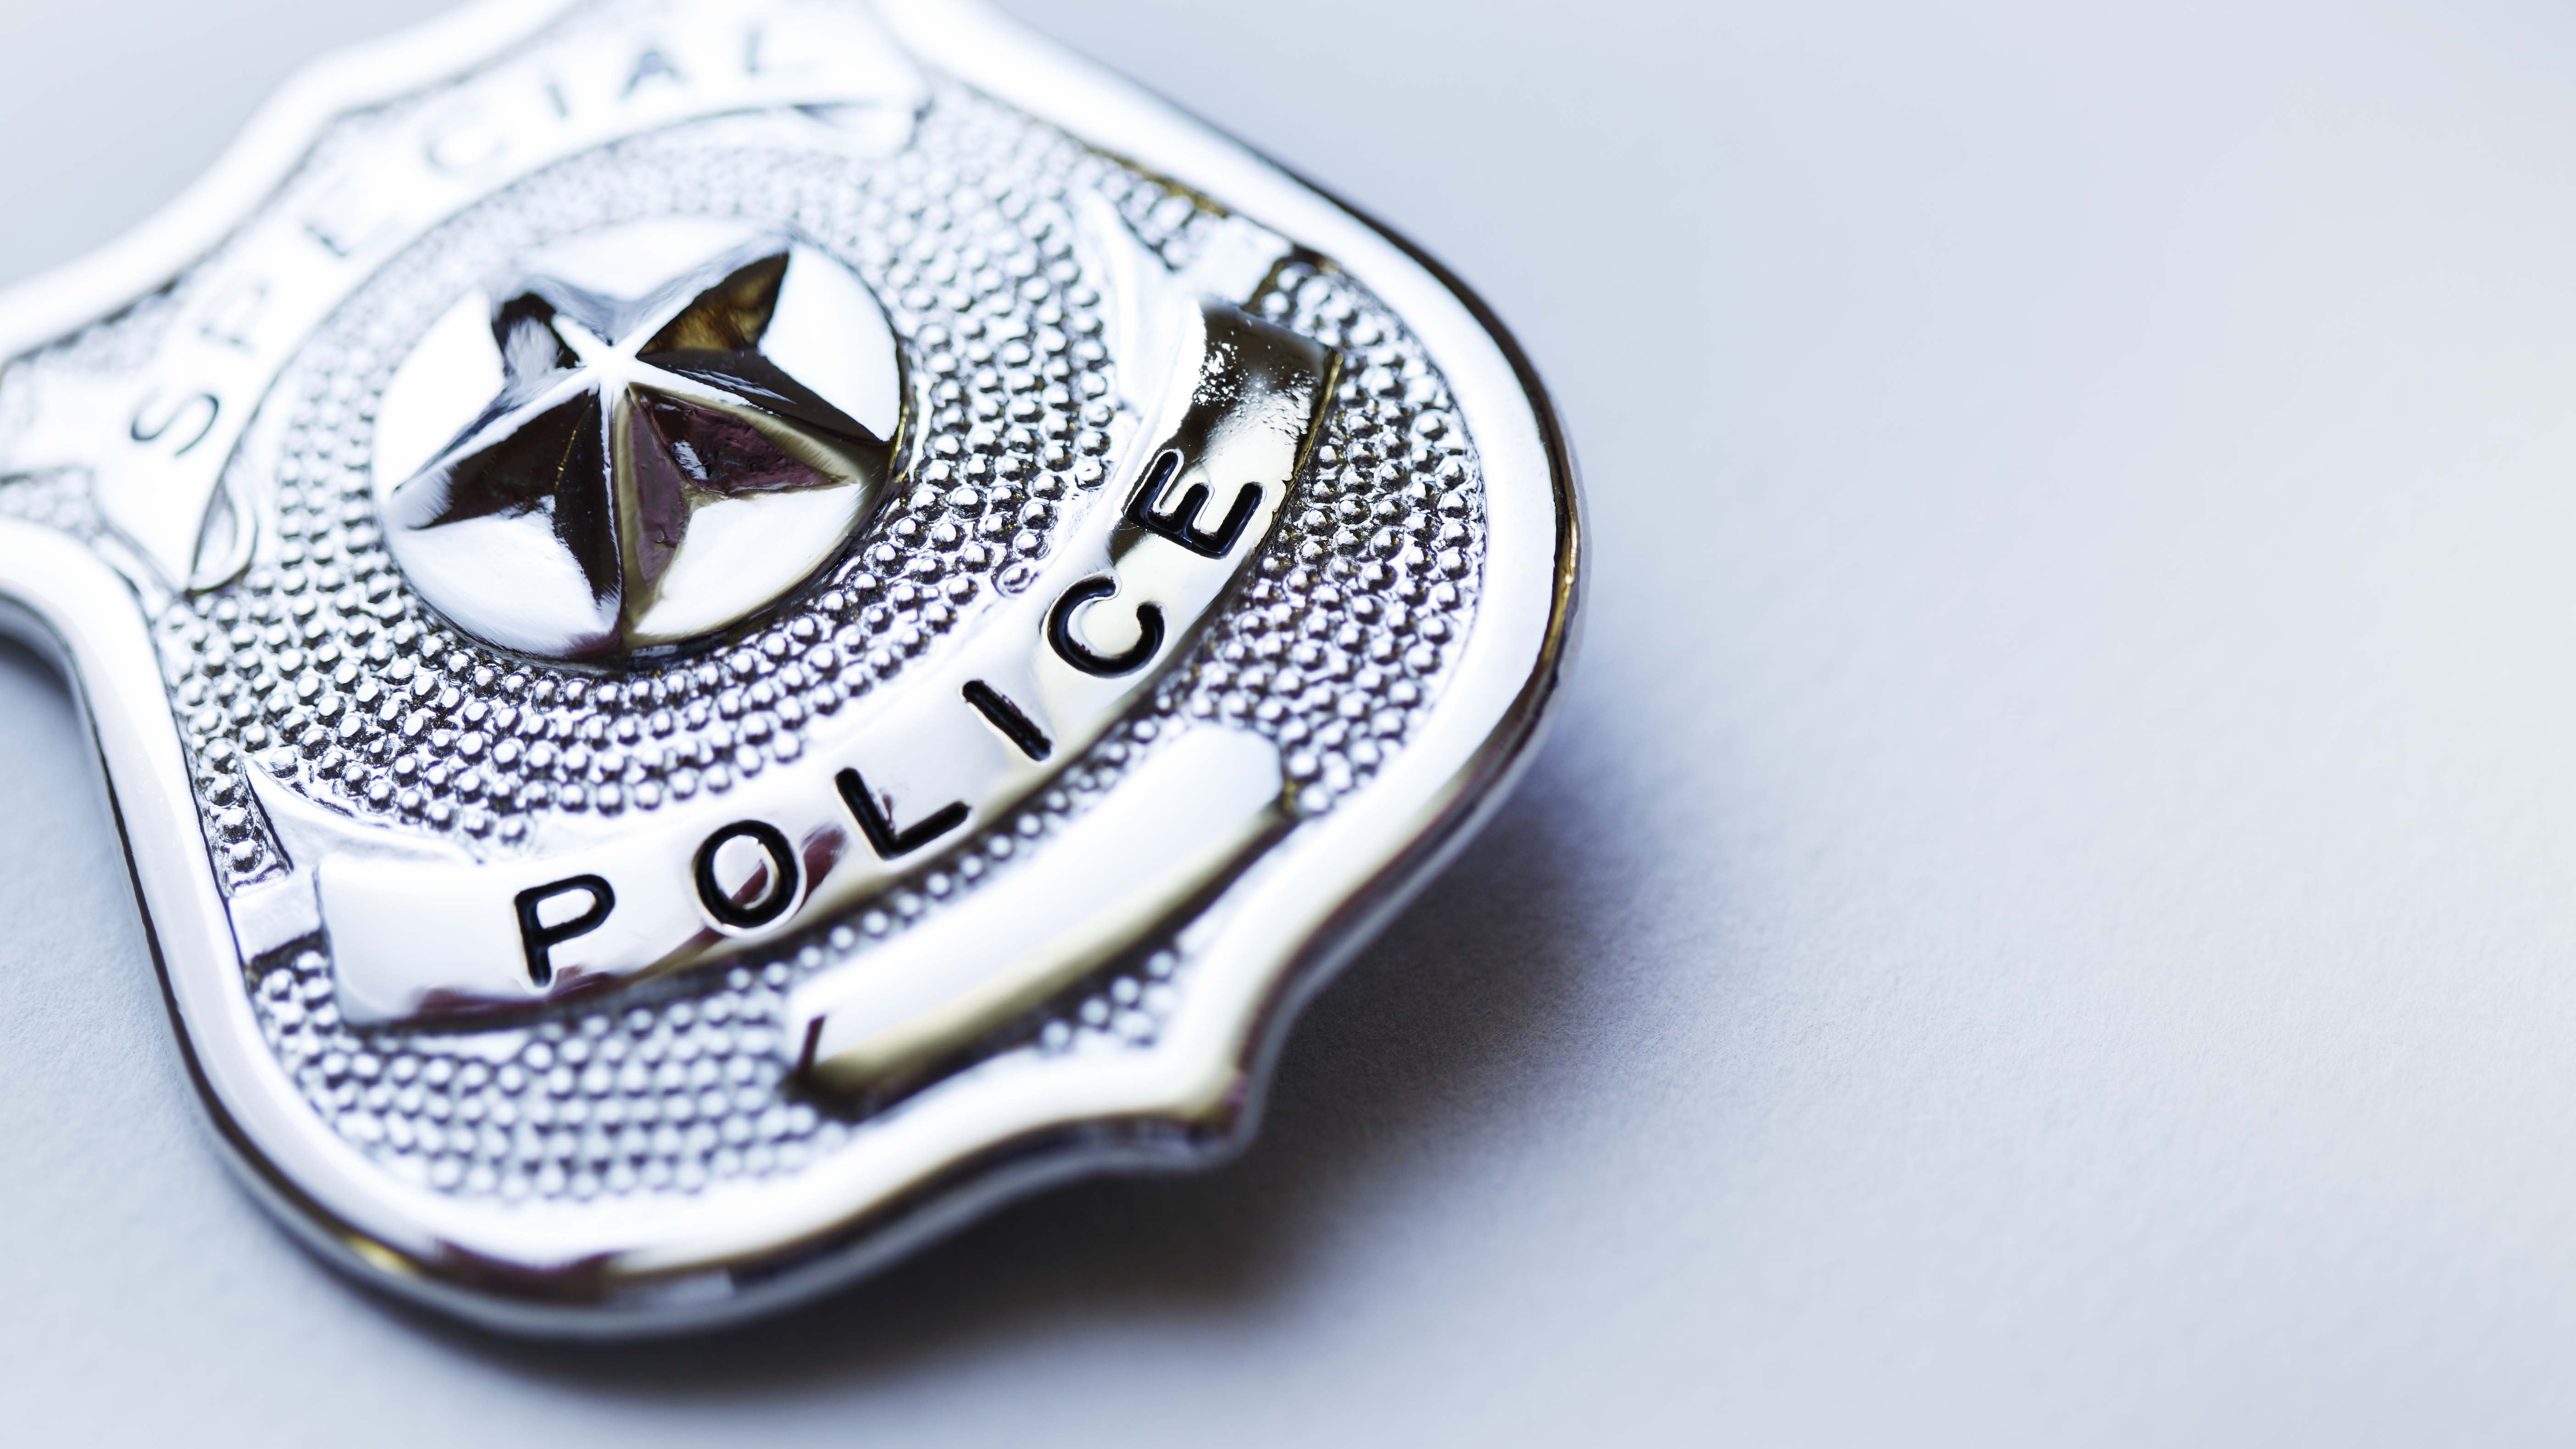 Law Enforcement Employee Survey Reveals Silver Linings for Police Departments